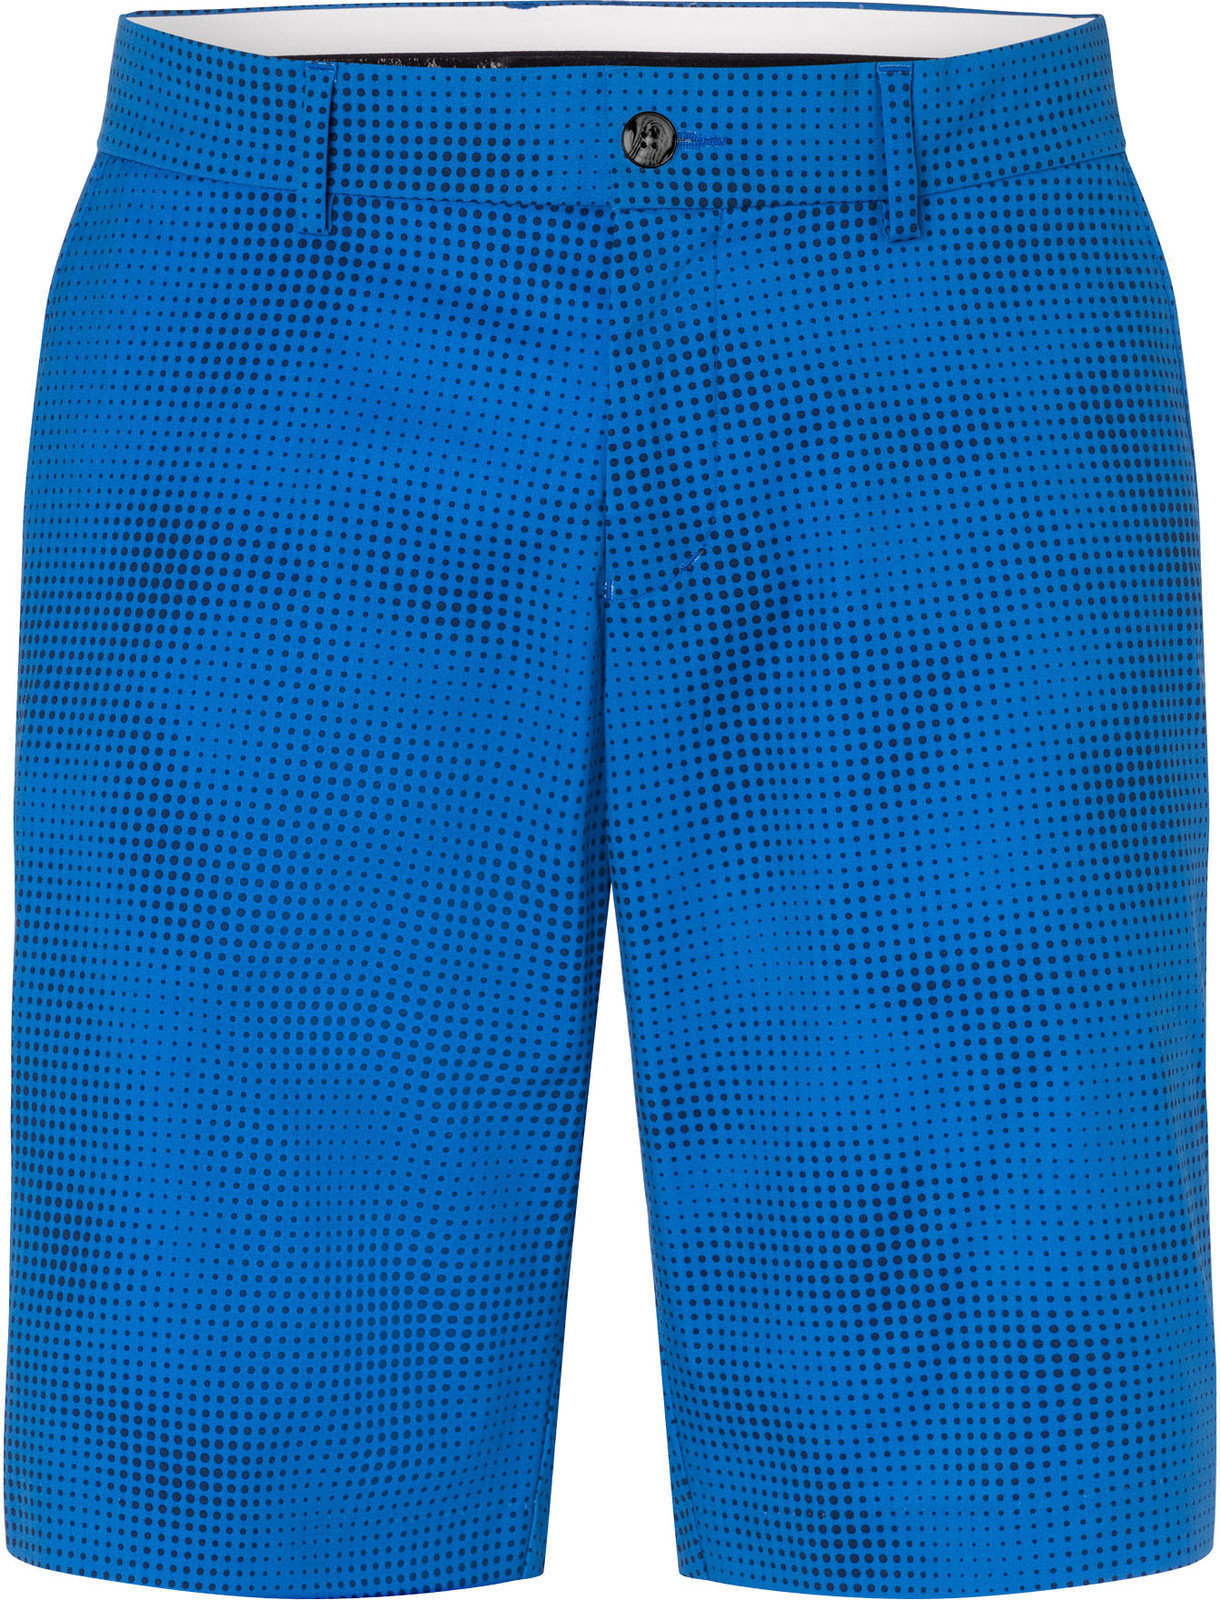 Shorts Kjus Inaction Pacific Blue 38